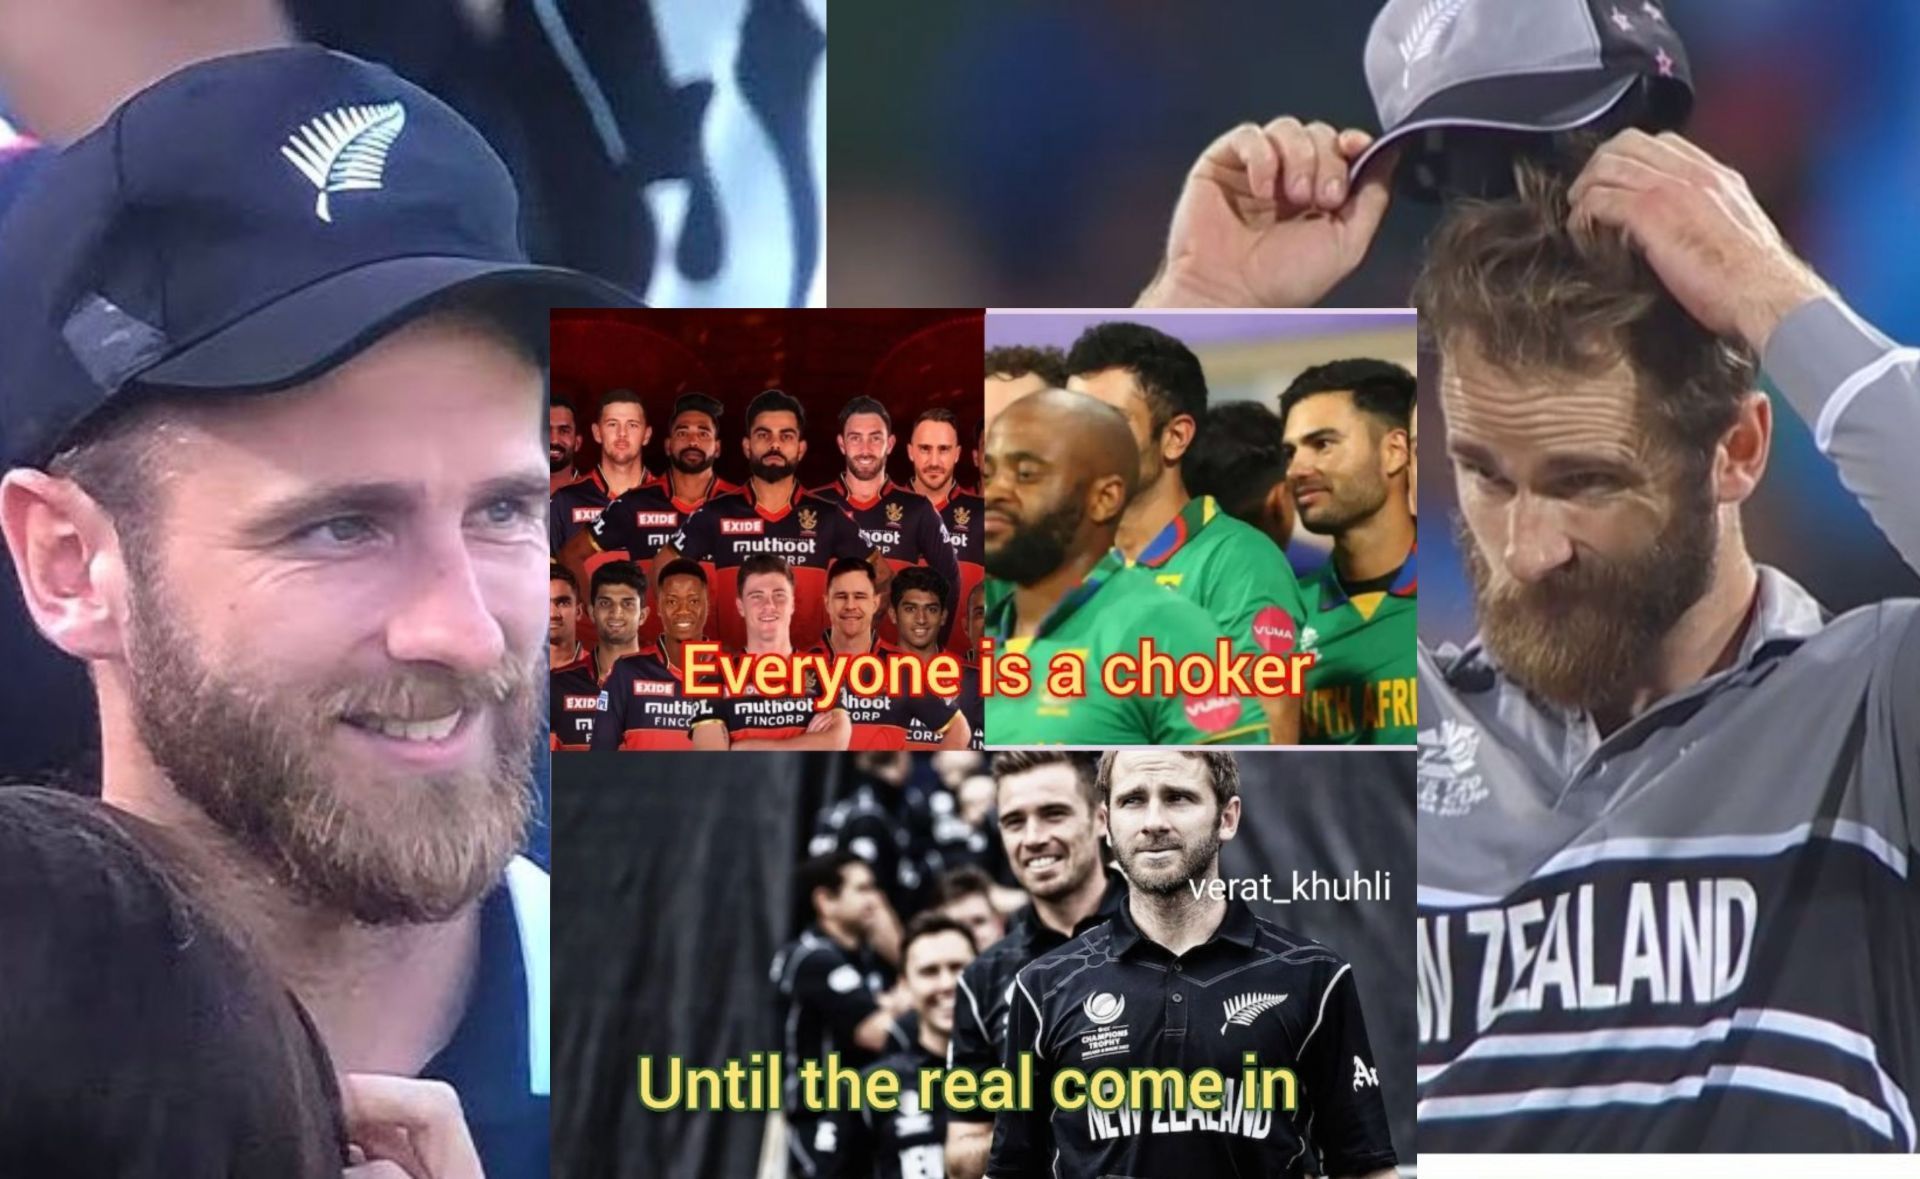 Fans troll New Zealand for consistently choking in knockout games over the years